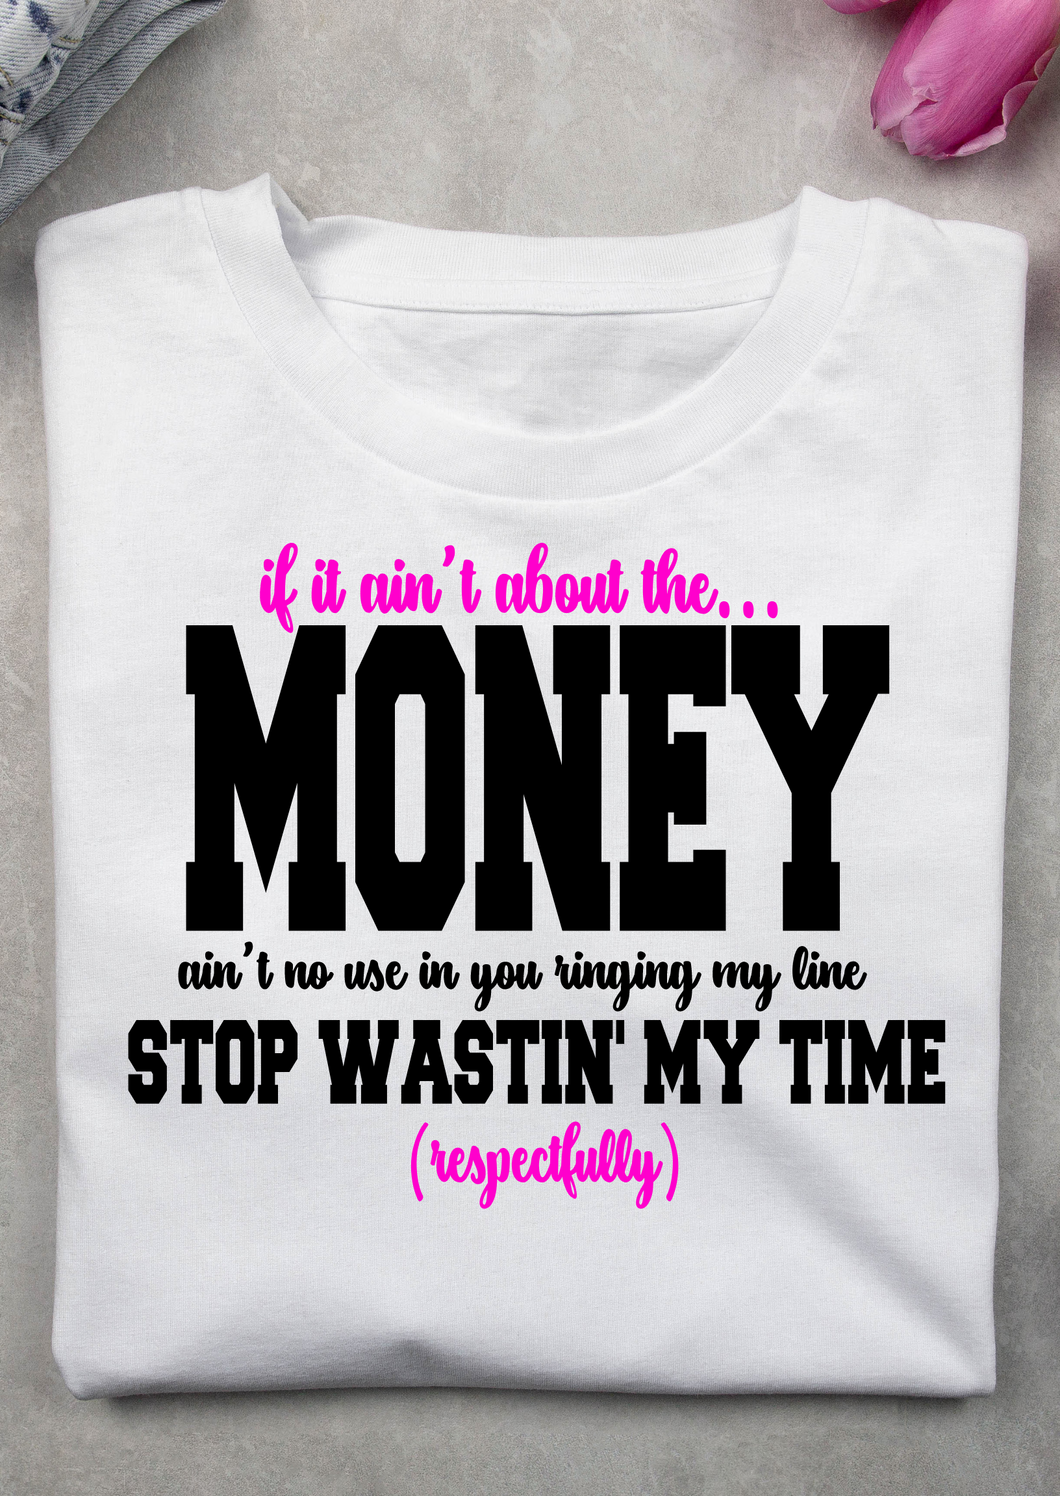 If it aint about Money tshirt